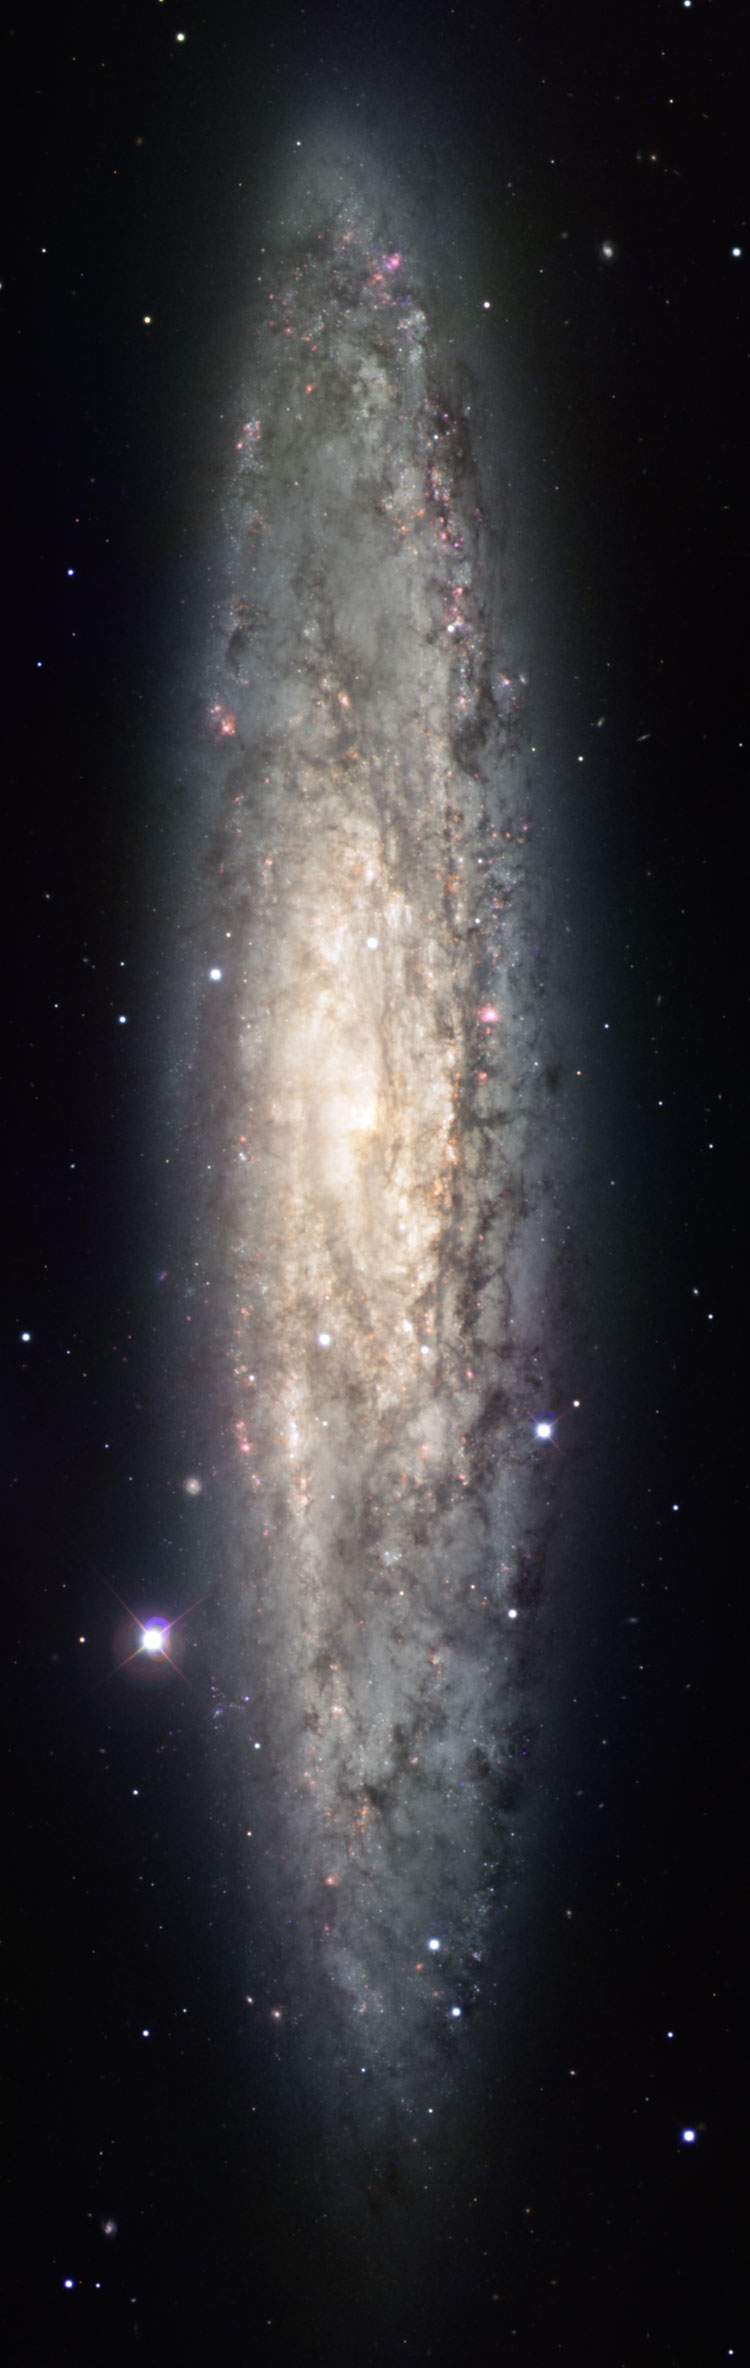 ESO image of spiral galaxy NGC 253, also known as the Sculptor Galaxy, or the Silver Dollar Galaxy